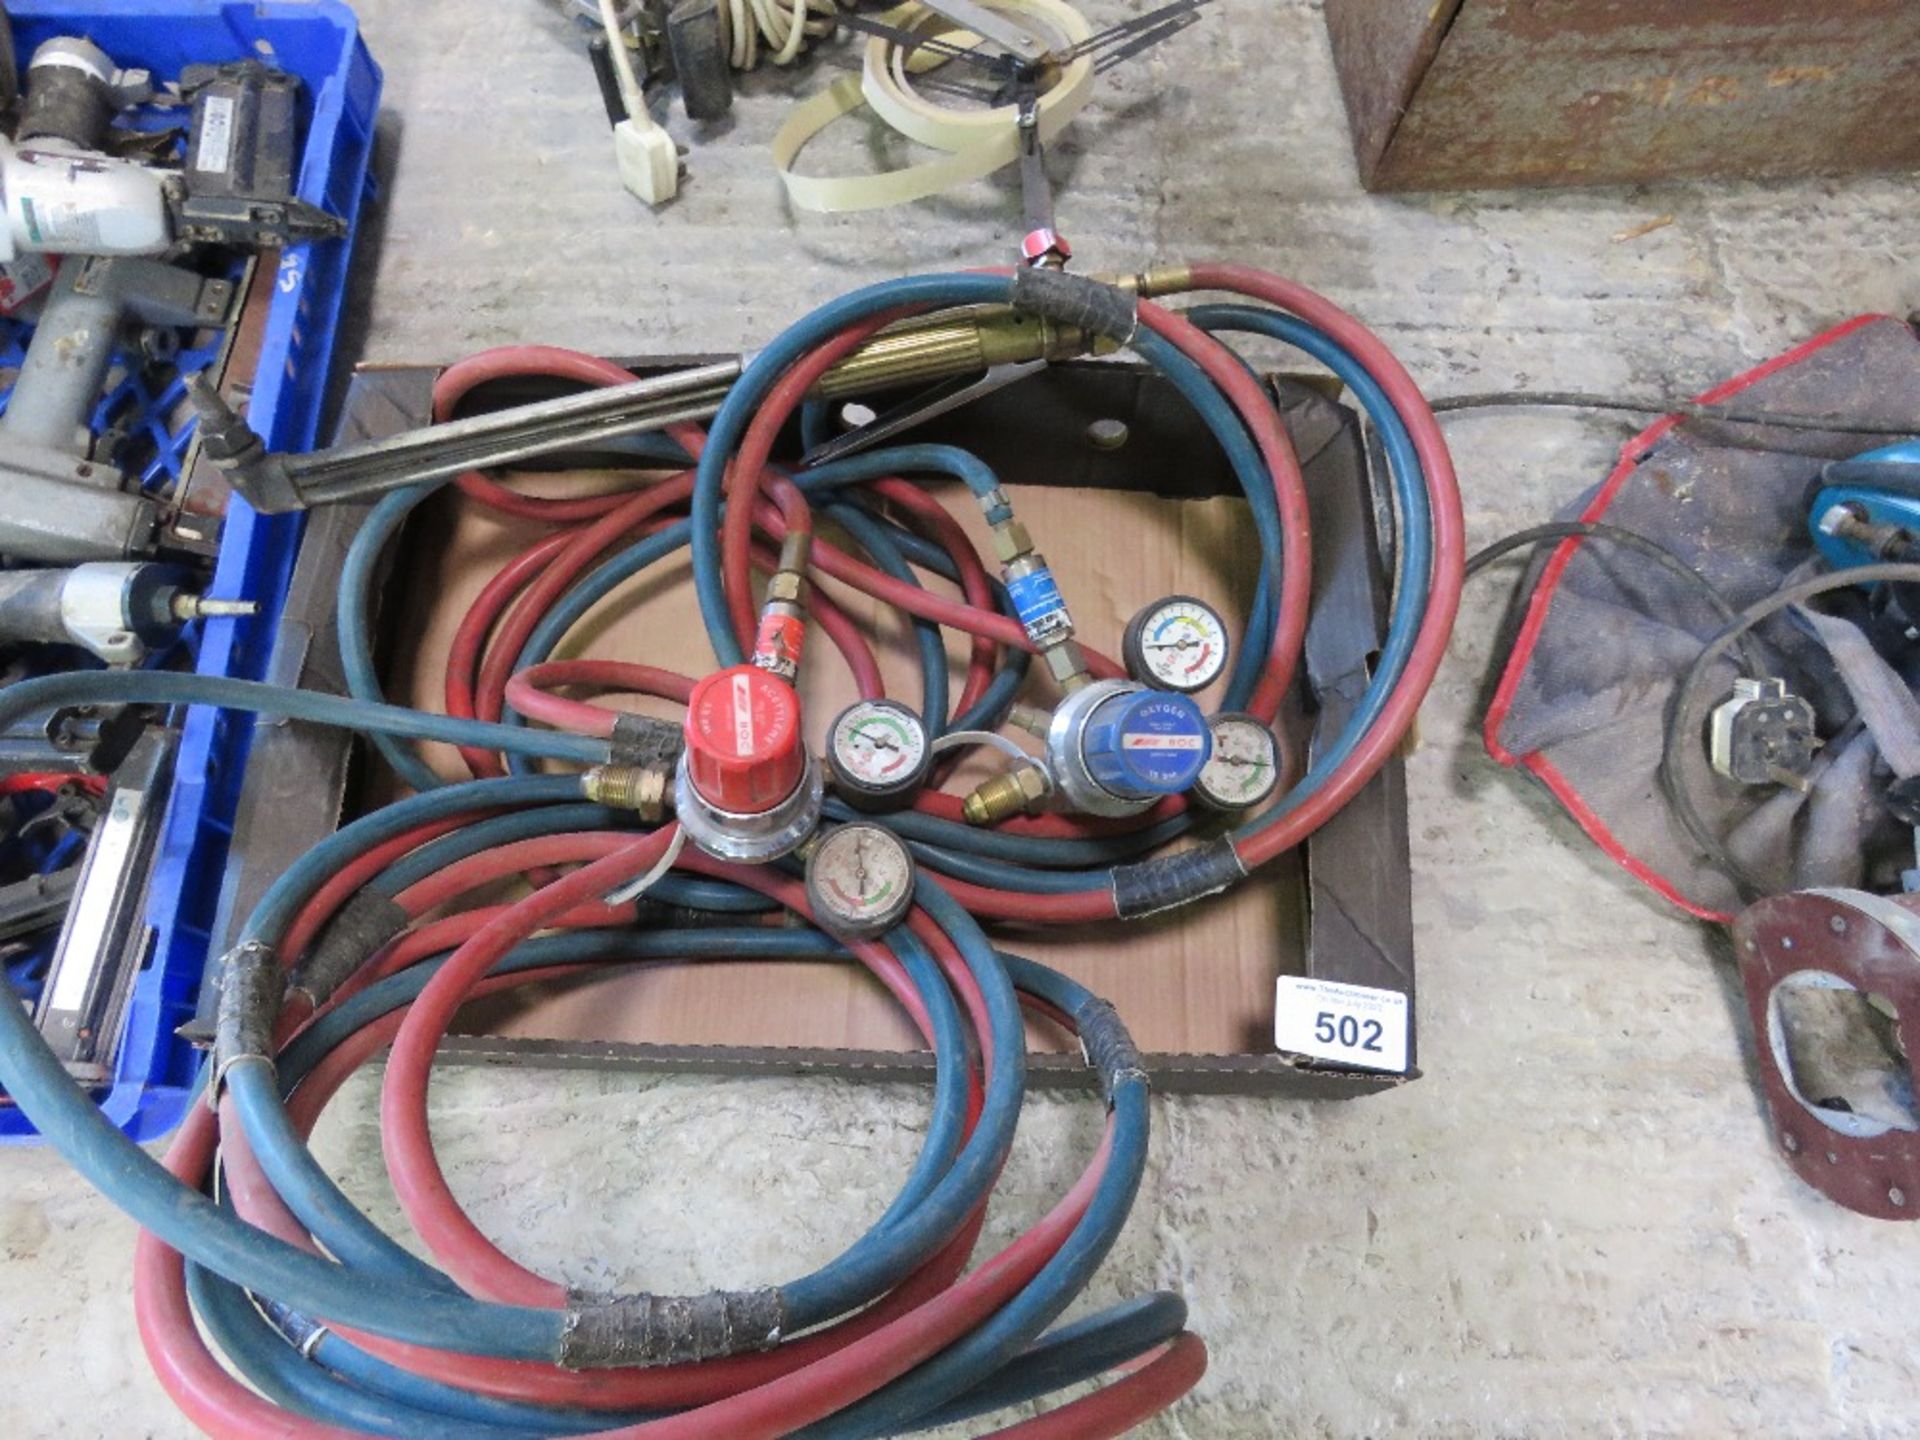 GAS CUTTING HOSES AND EQUIPMENT. - Image 2 of 3